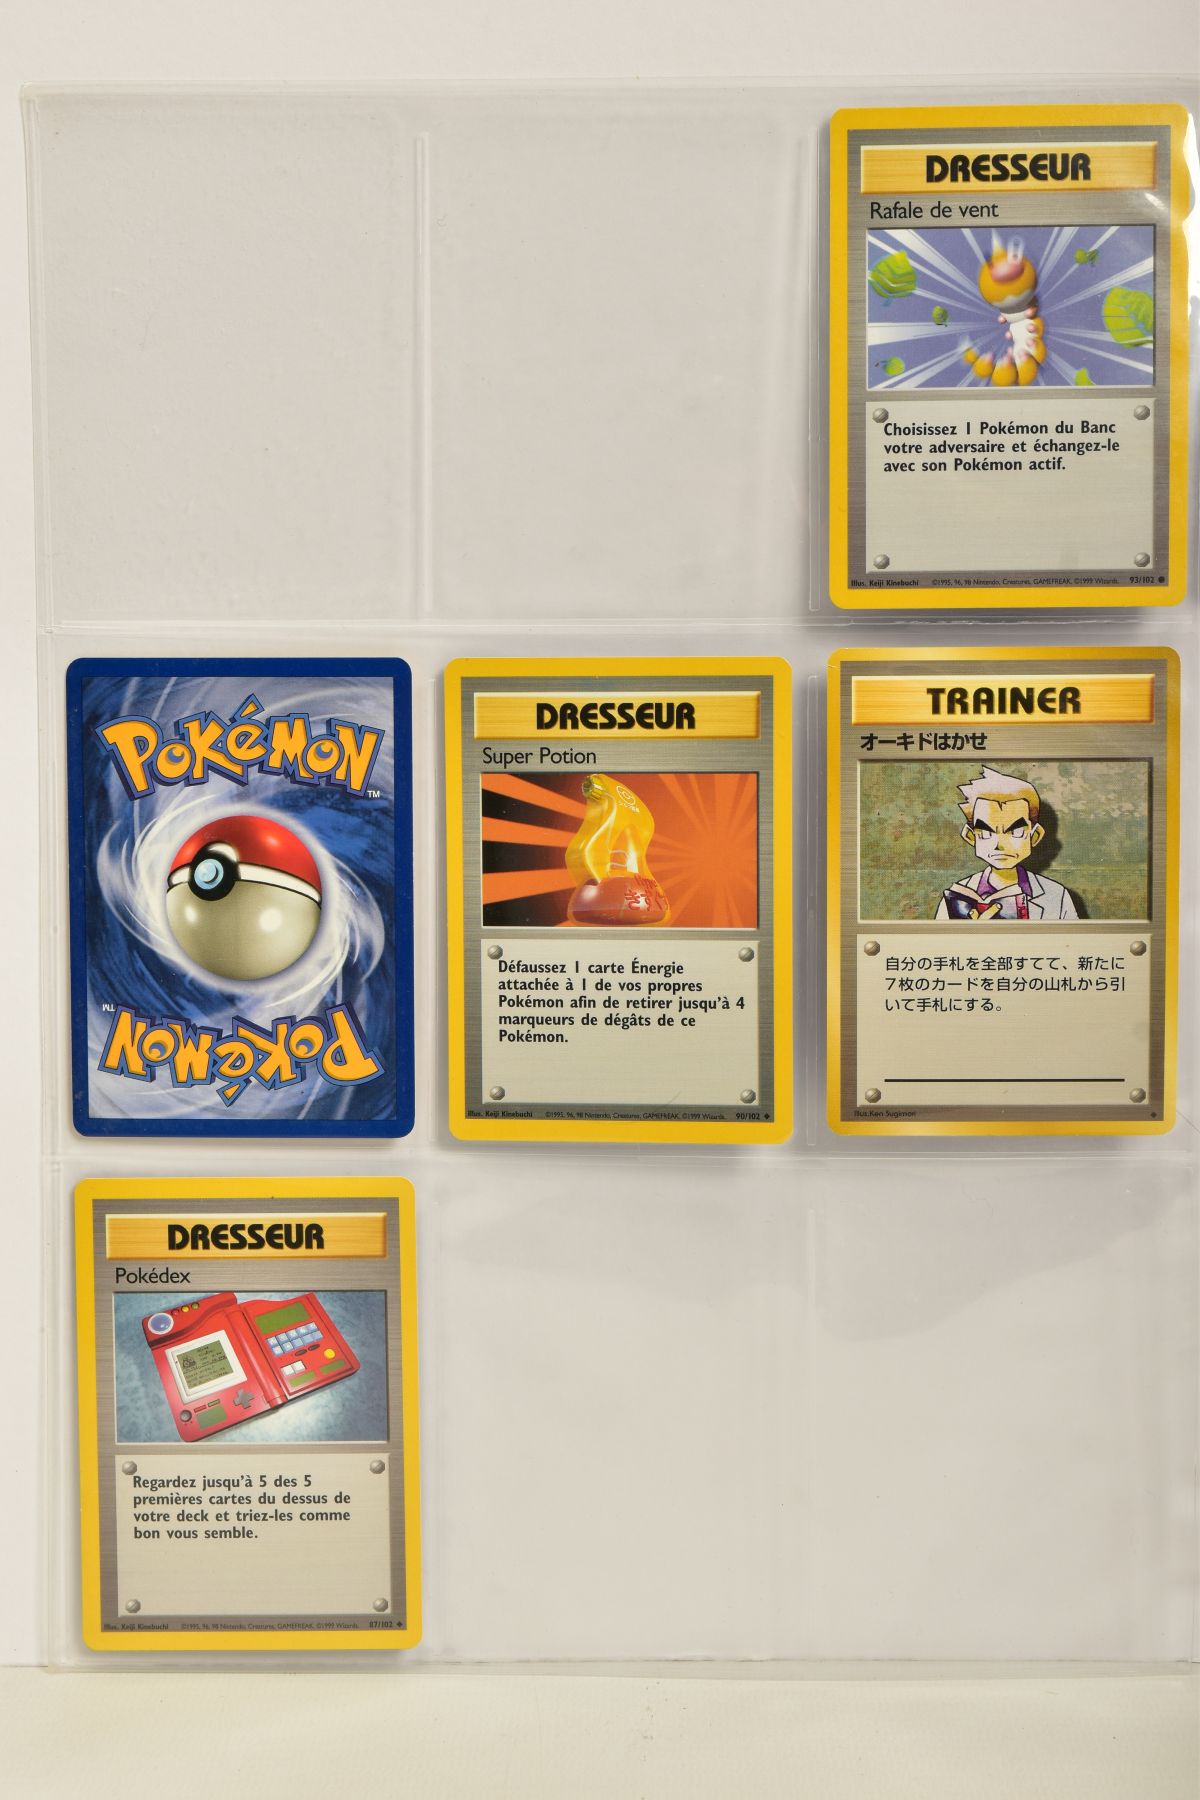 A QUANTITY OF POKEMON TCG CARDS, cards are assorted from Base Set, Base Set 2, Jungle, Fossil, - Image 37 of 46